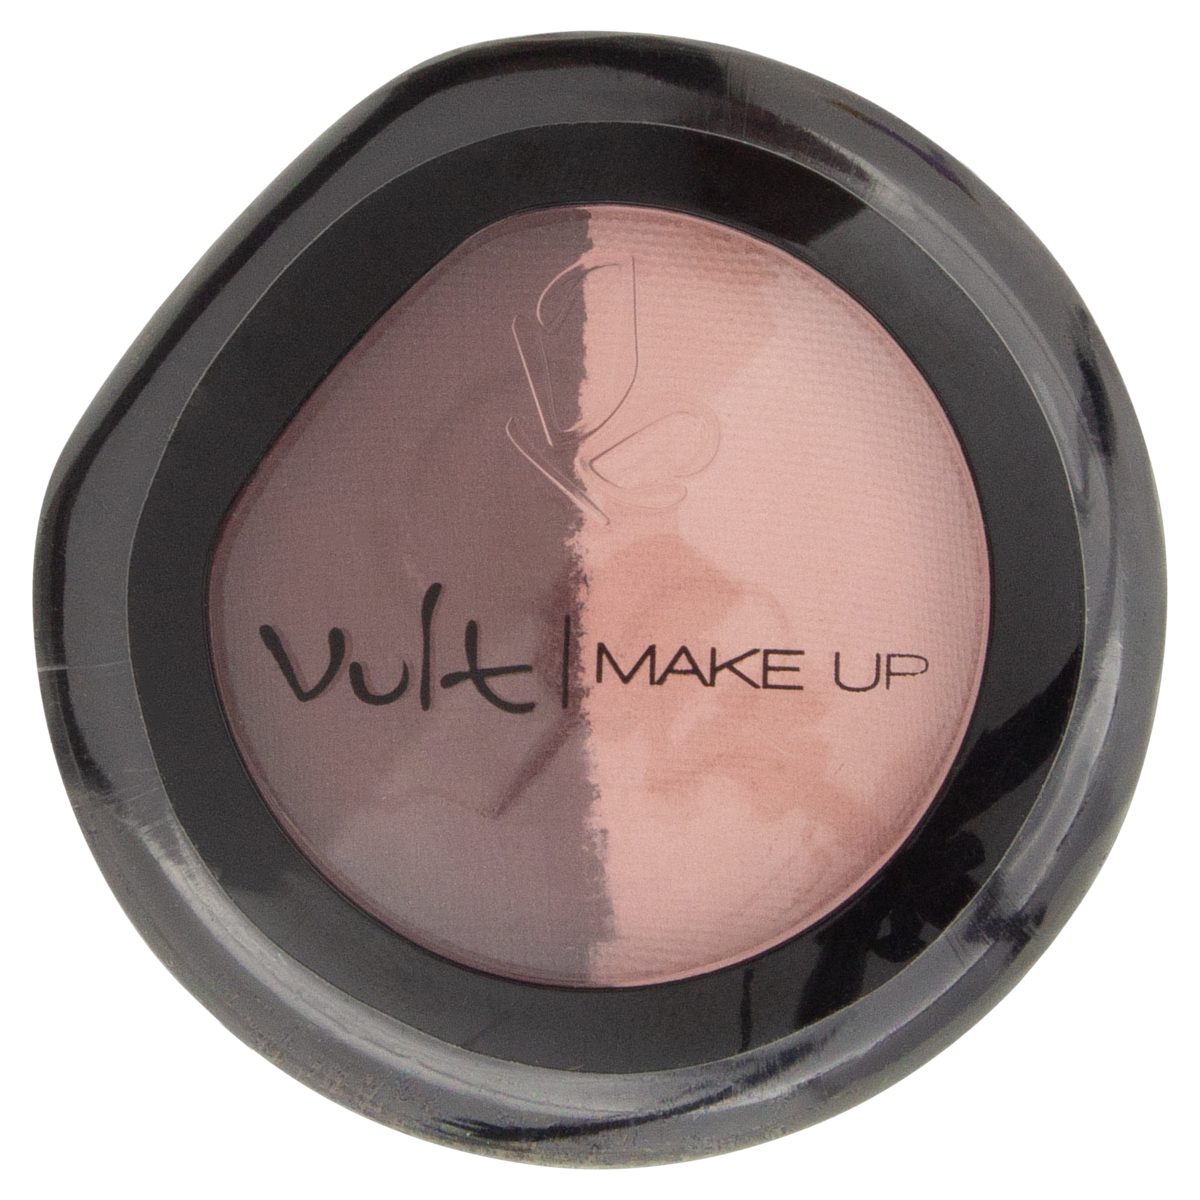 7898417962164 - SOMBRA DUO 16 VULT MAKE UP 2,5G